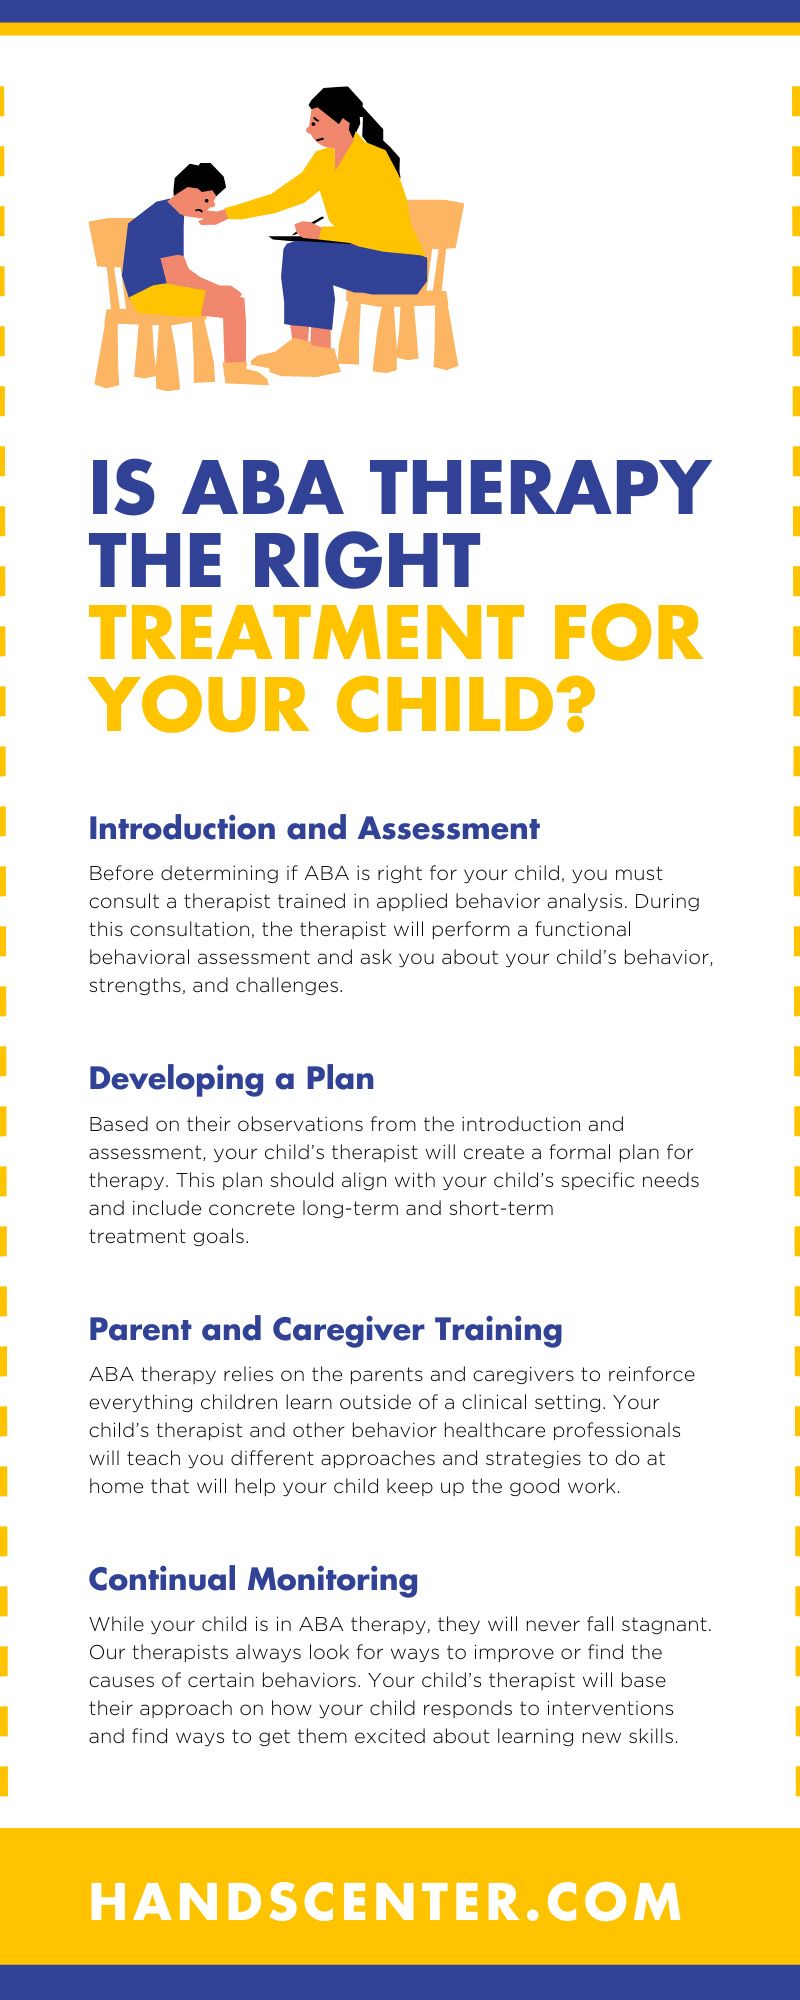 Is ABA Therapy the Right Treatment for Your Child?